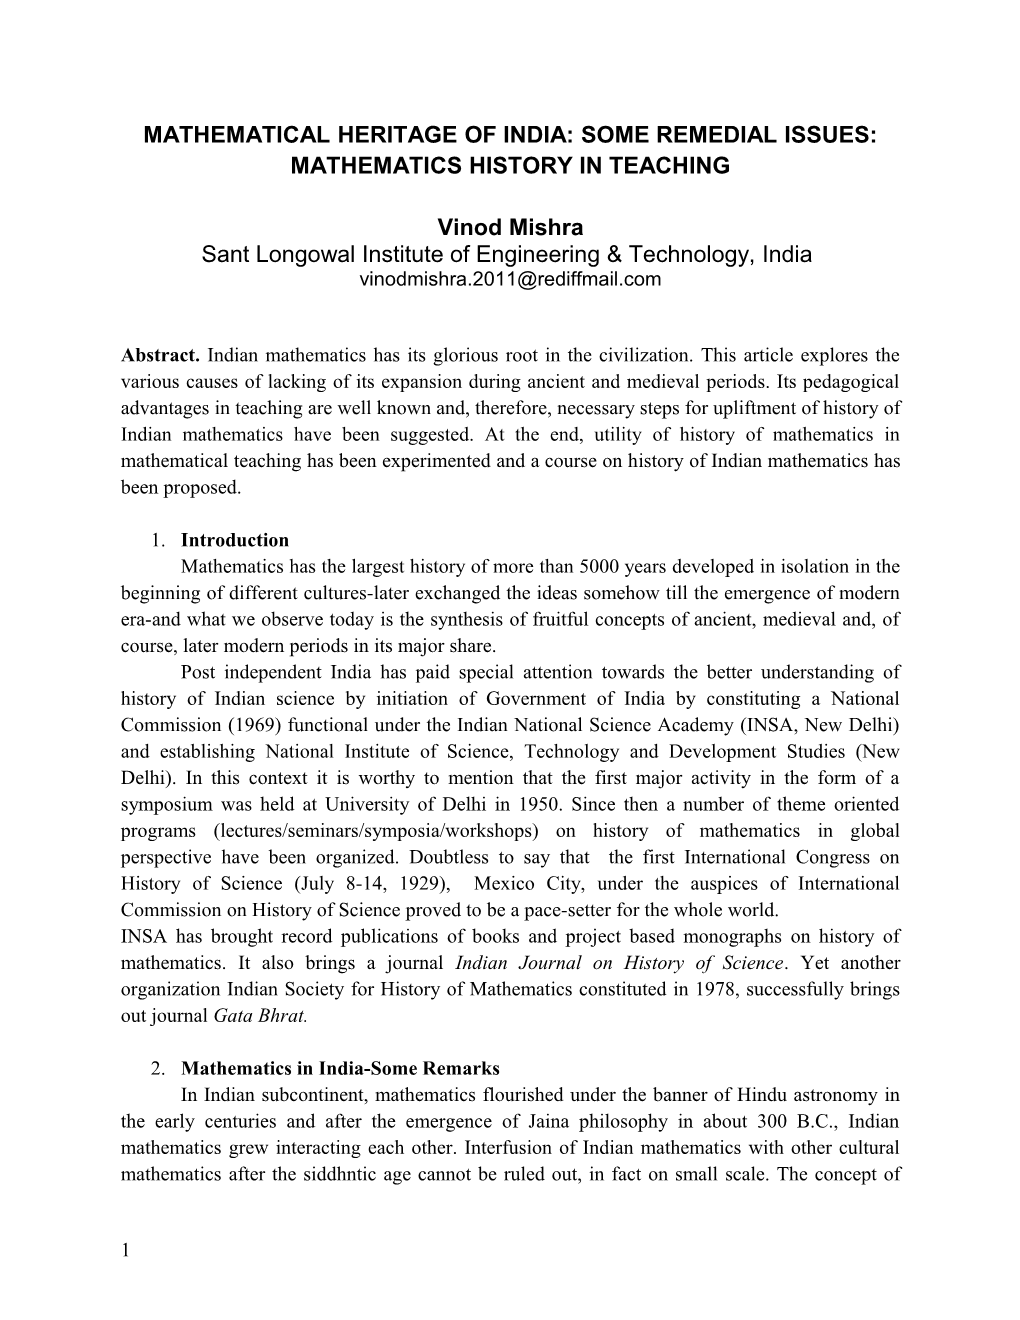 Mathematical Heritage of India: Some Remedial Issues: Mathematics History in Teaching